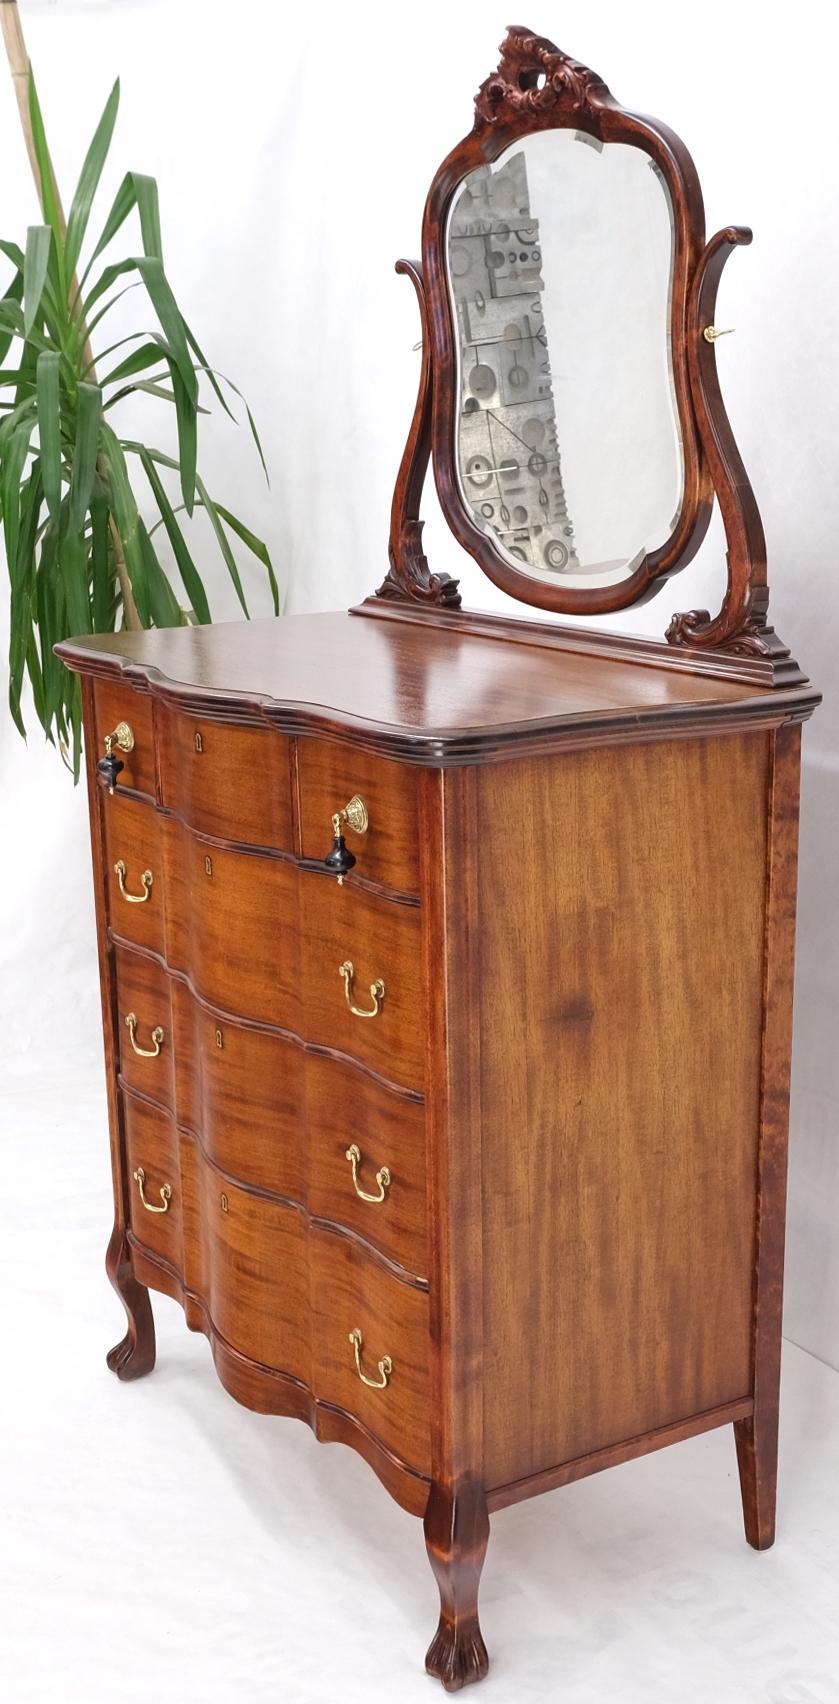 Serpentine Front 4 Drawers Swivel Mirror Mahogany Dresser High Chest Ball Claw 4